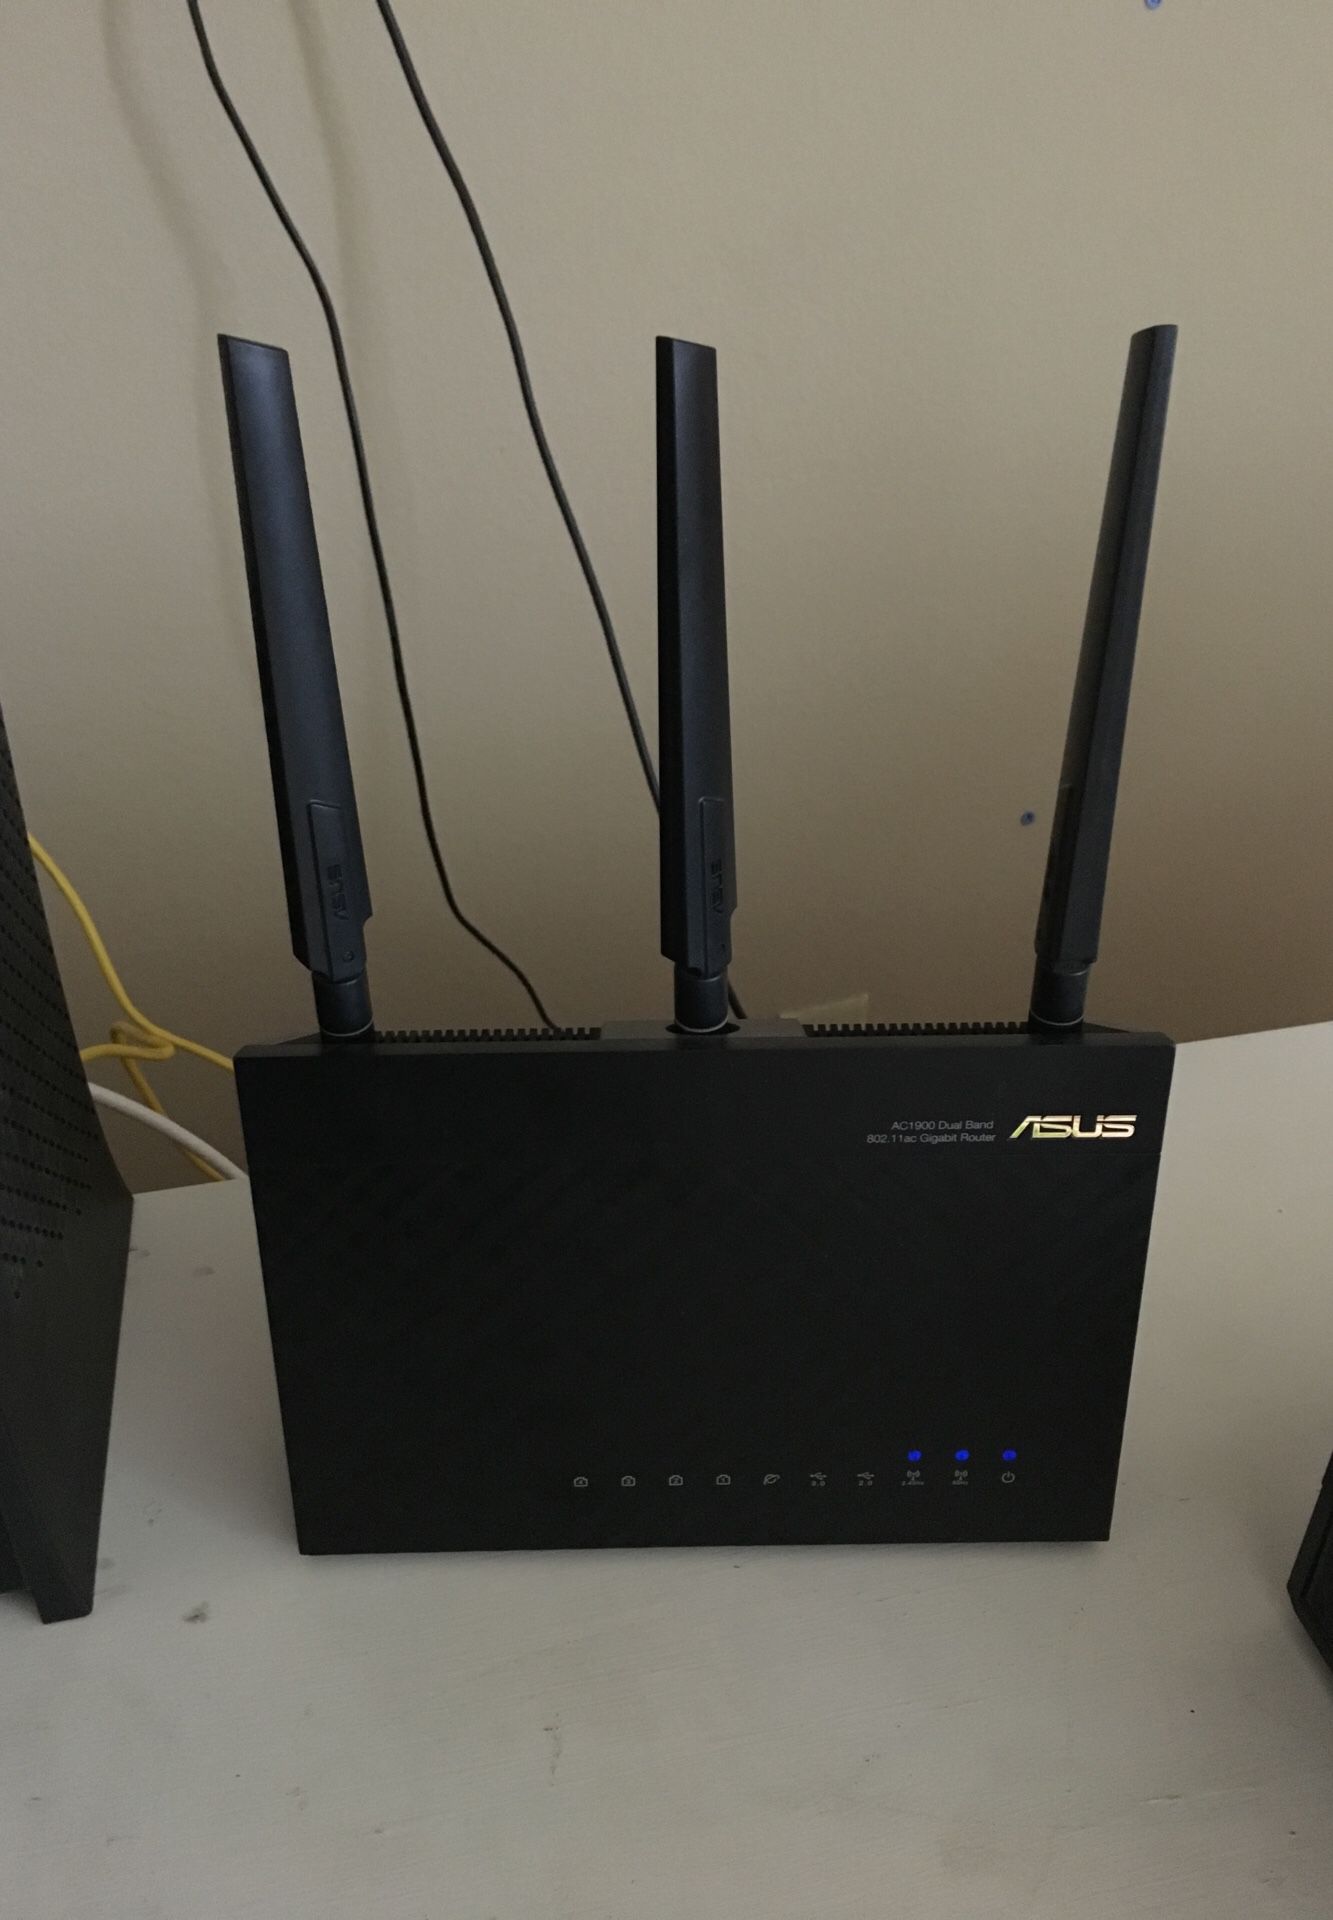 ASUS AC1900 Router